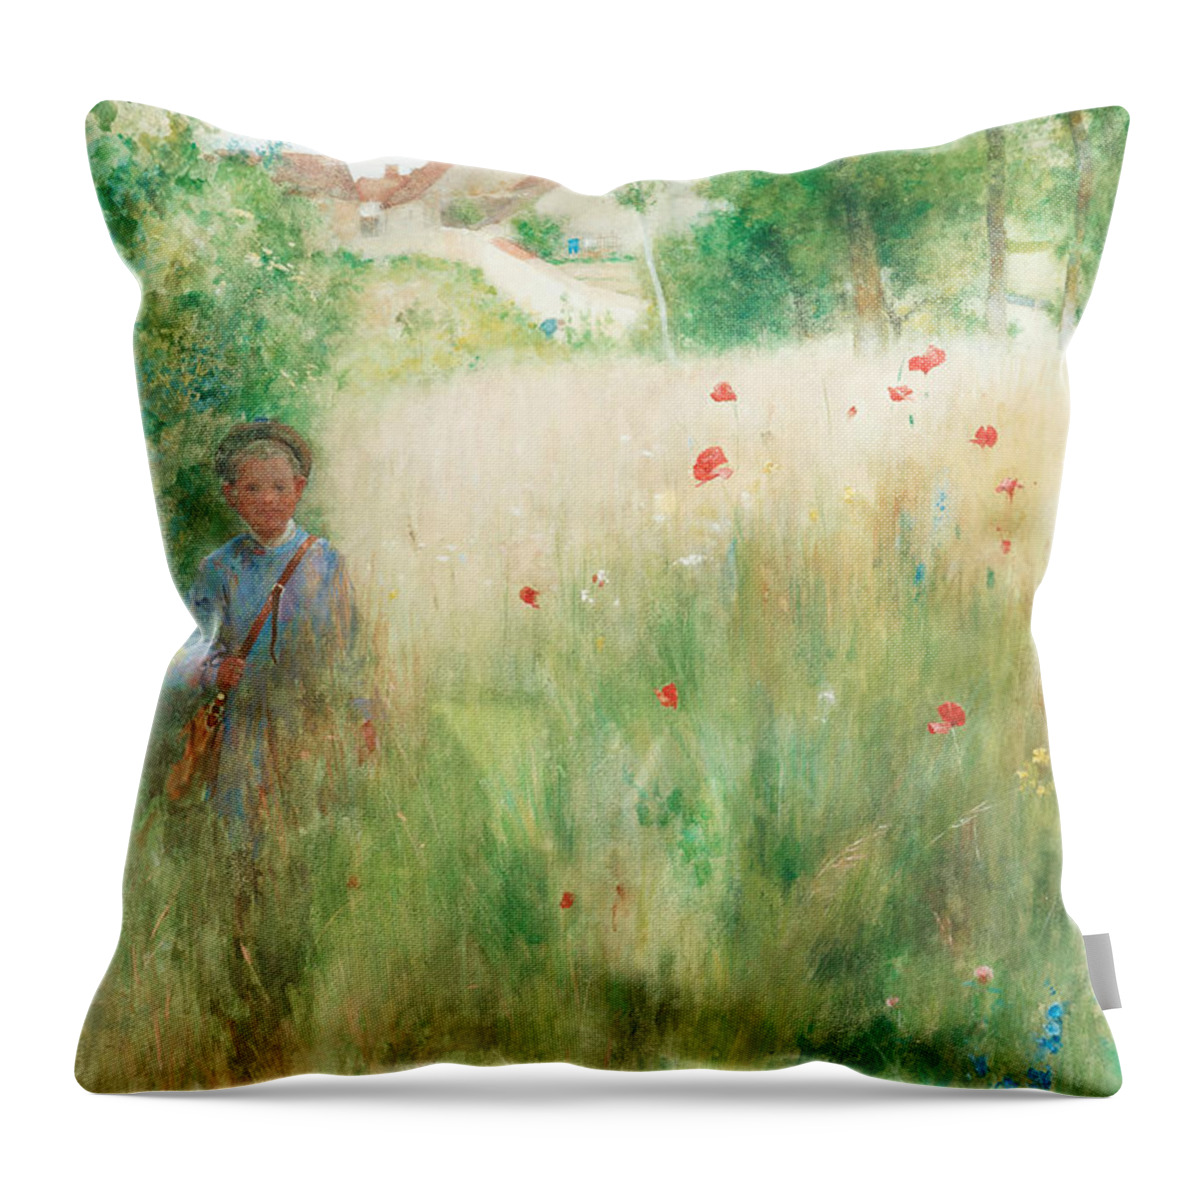 19th Century Art Throw Pillow featuring the painting Poppies by Carl Larsson